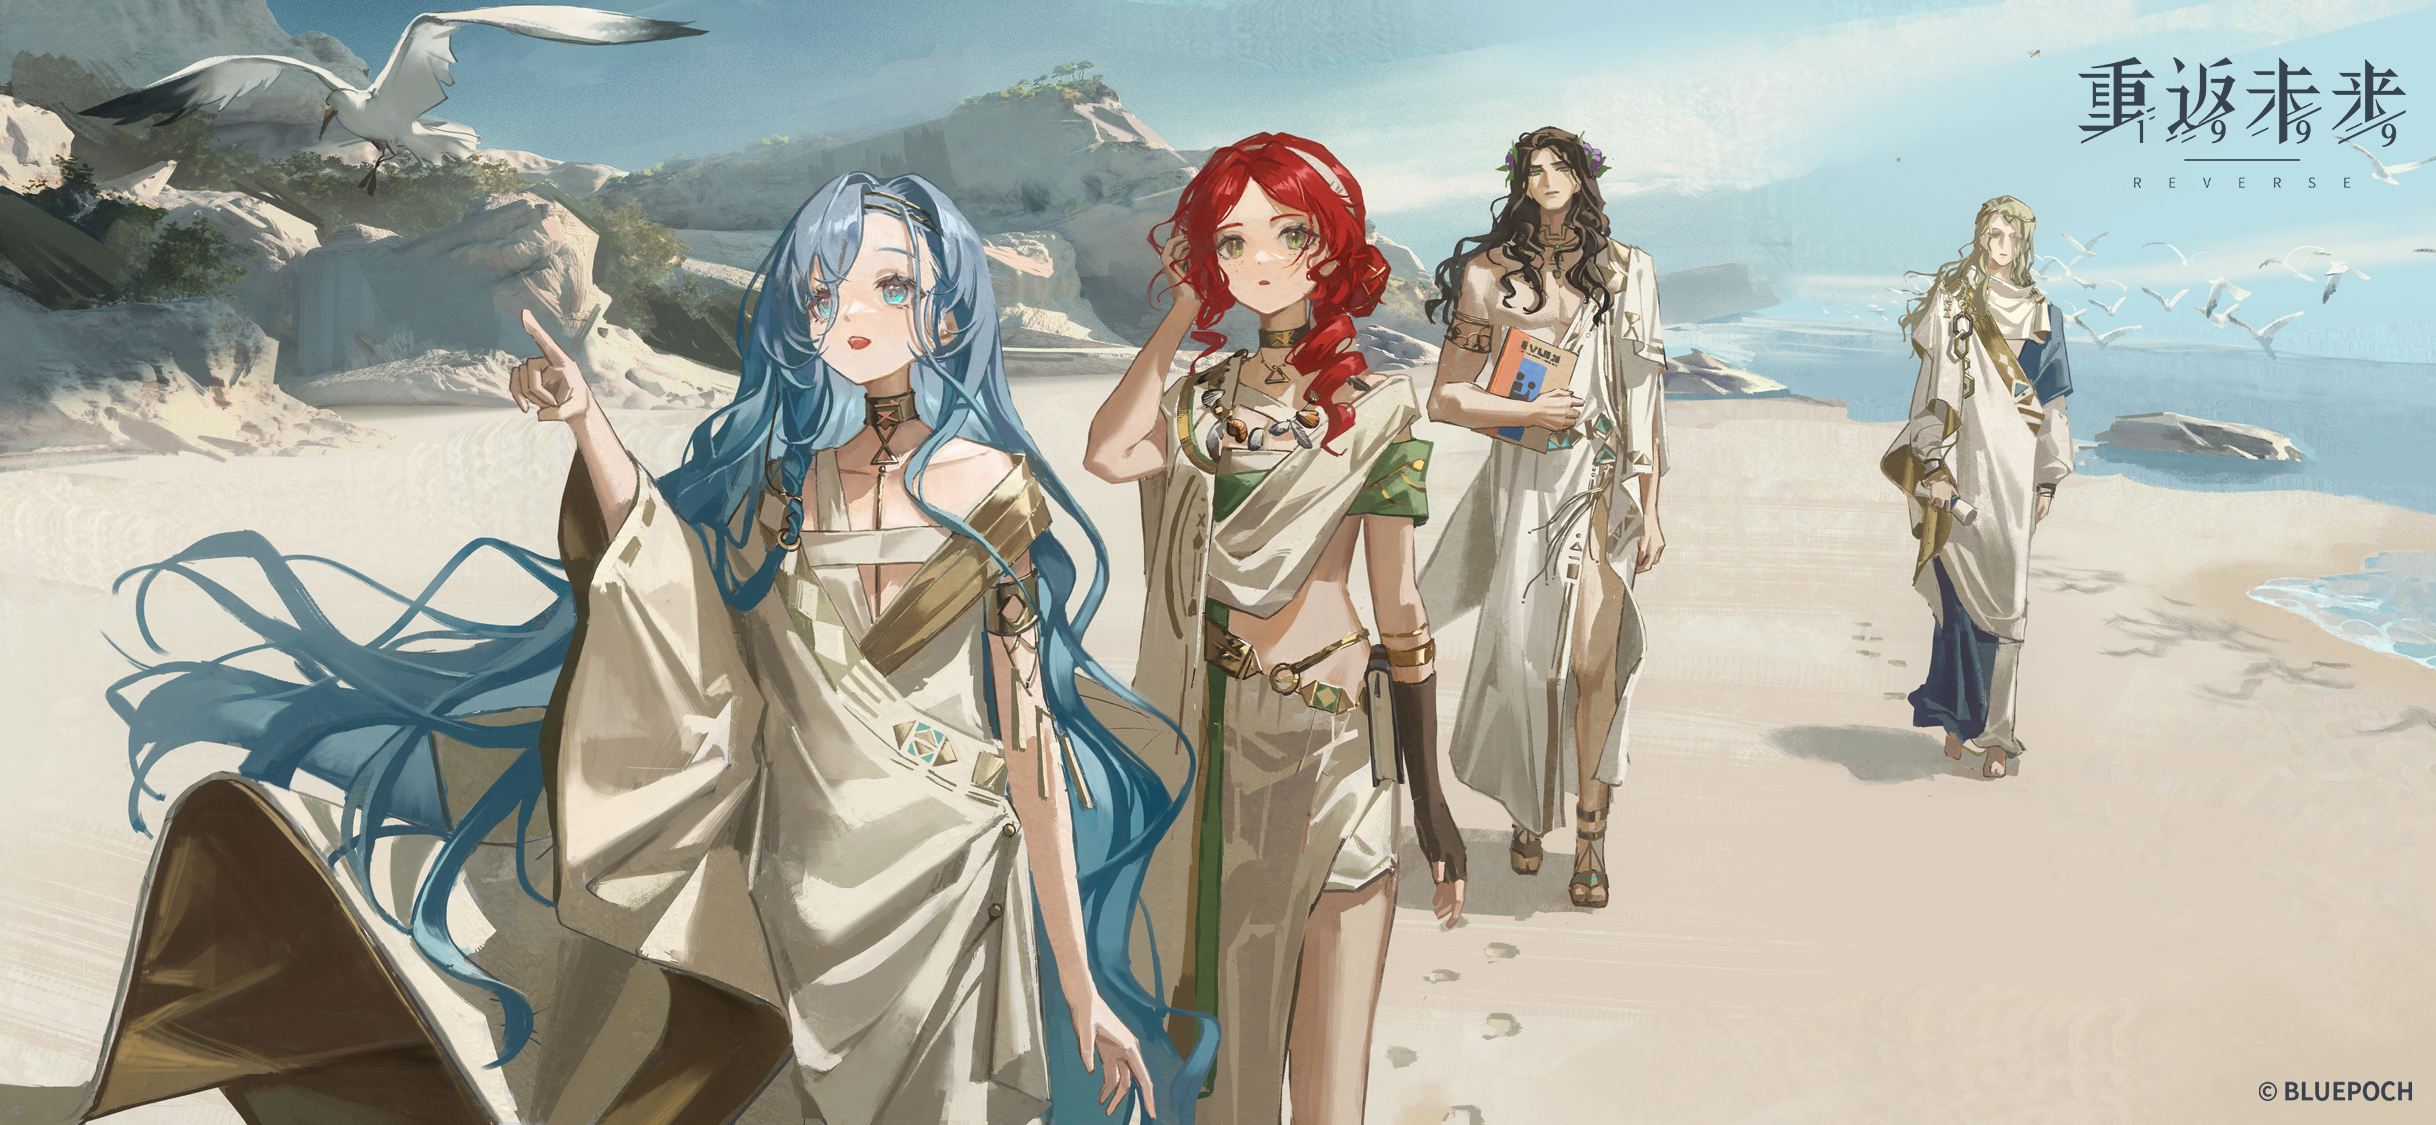 Anime 2436x1125 Reverse: 1999 Bluepoch anime girls anime boys 37 (reverse: 1999) beach 210 (Reverse:1999) birds 6 (Reverse:1999) seagulls sophia (reverse: 1999) sea outdoors finger pointing ancient Greek clothes cliff group of people circlet watermarked barefoot Japanese looking up sky clouds scrolls Reverse: 1999